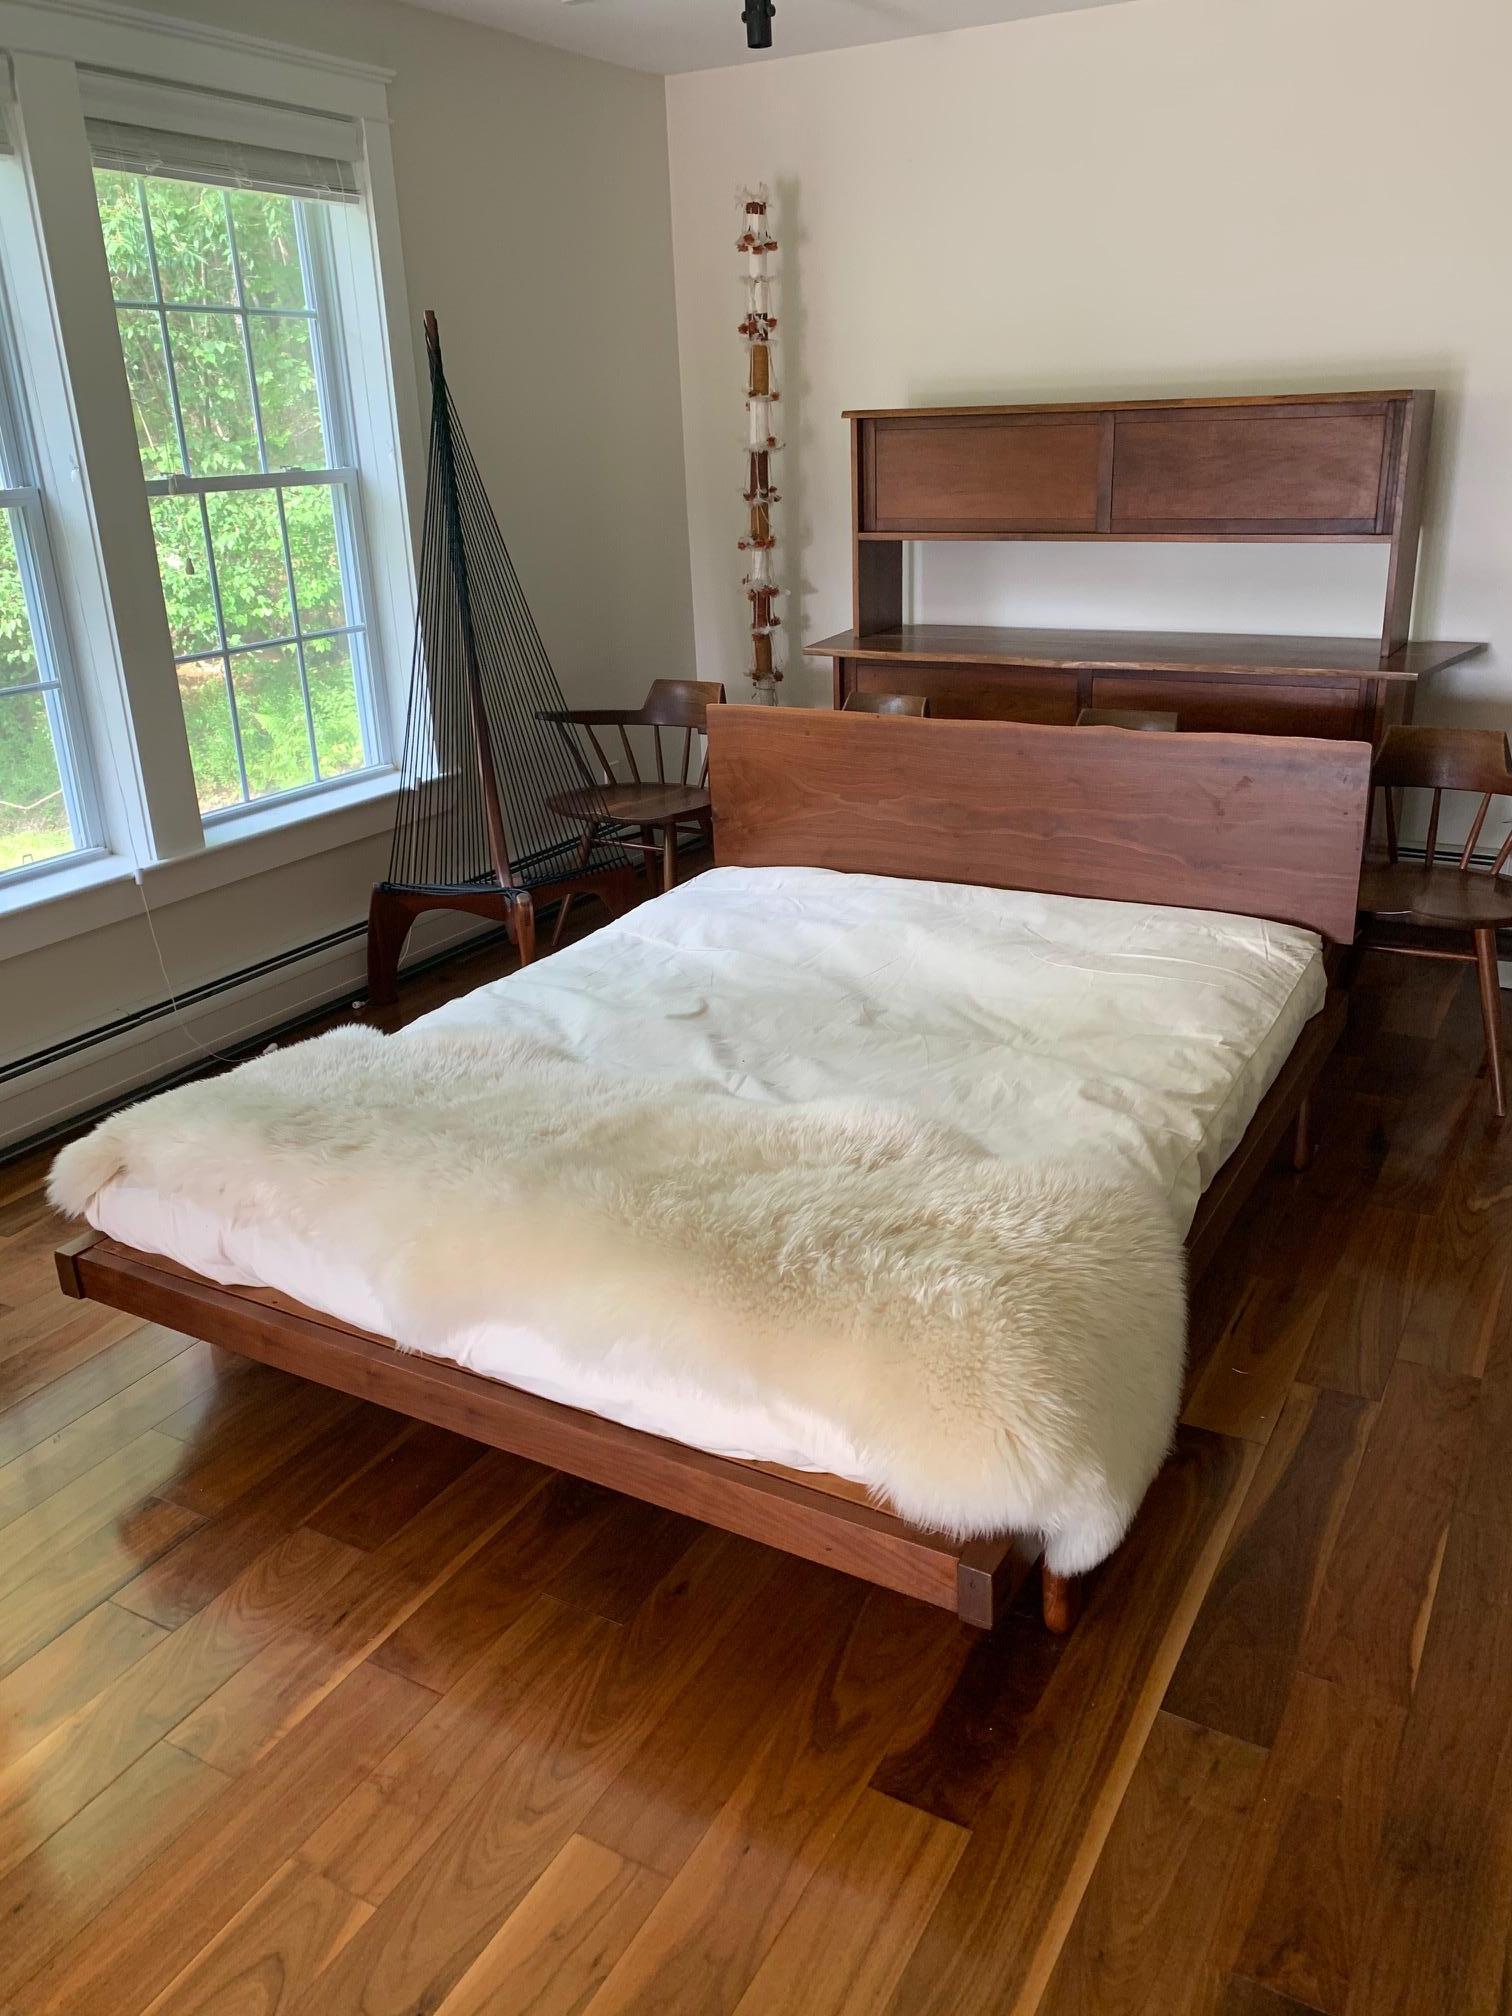 Platform bed studio crafted in the style of George Nakashima circa 1960s. It features a mounted walnut slab headboard that display free edge on top. The slab itself is 16.5 inches in height. The bed is supported by four feet with typical wood